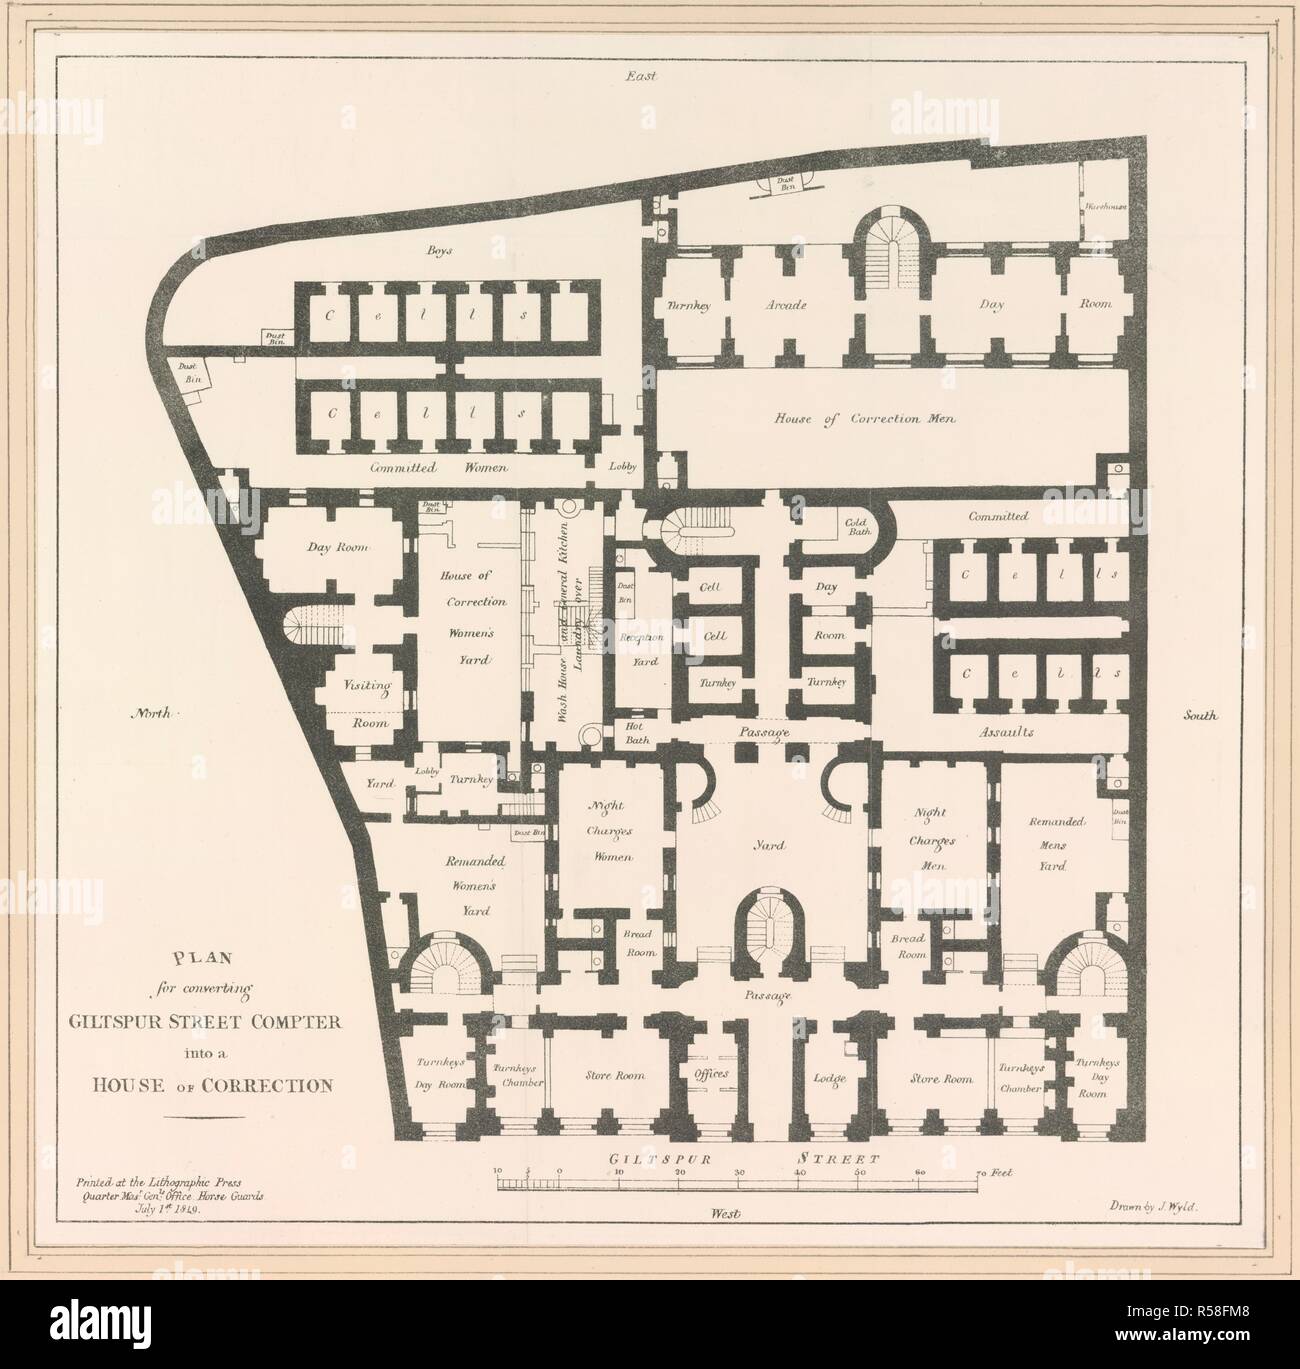 Plan for converting Giltspur Street compter into a house of correction.  Plan for converting Giltspur Street compter into a house of correction.  London, 1849. Source: Maps.Crace.Port.8.86. Language: English. Author:  Wyld, John Stock